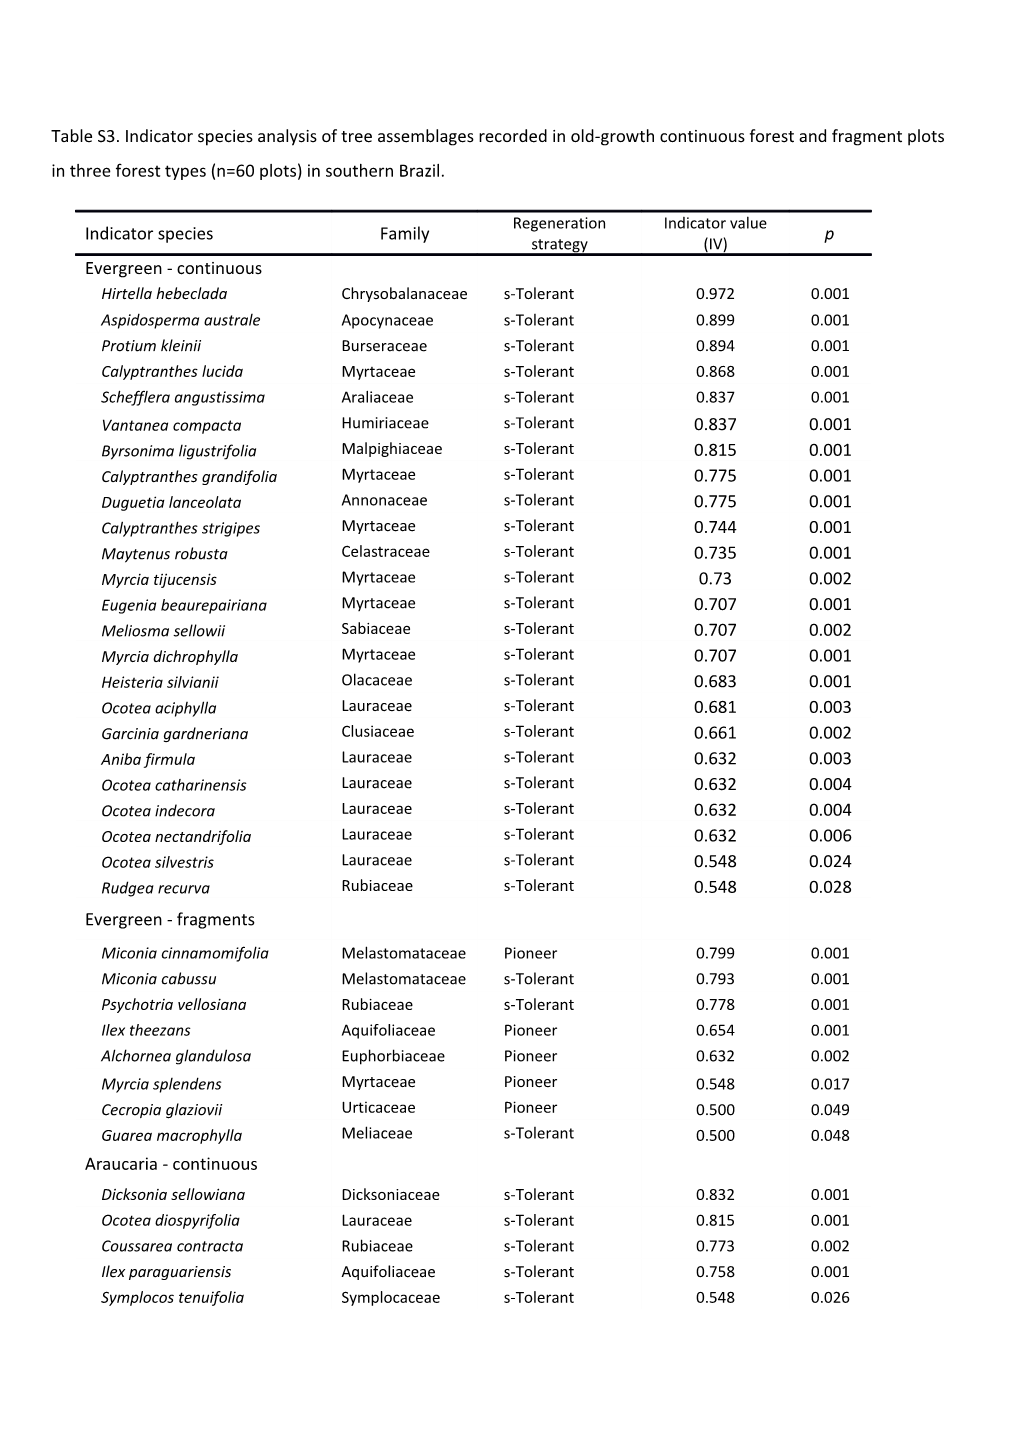 Table S3. Indicator Species Analysis of Tree Assemblages Recorded in Old-Growth Continuous